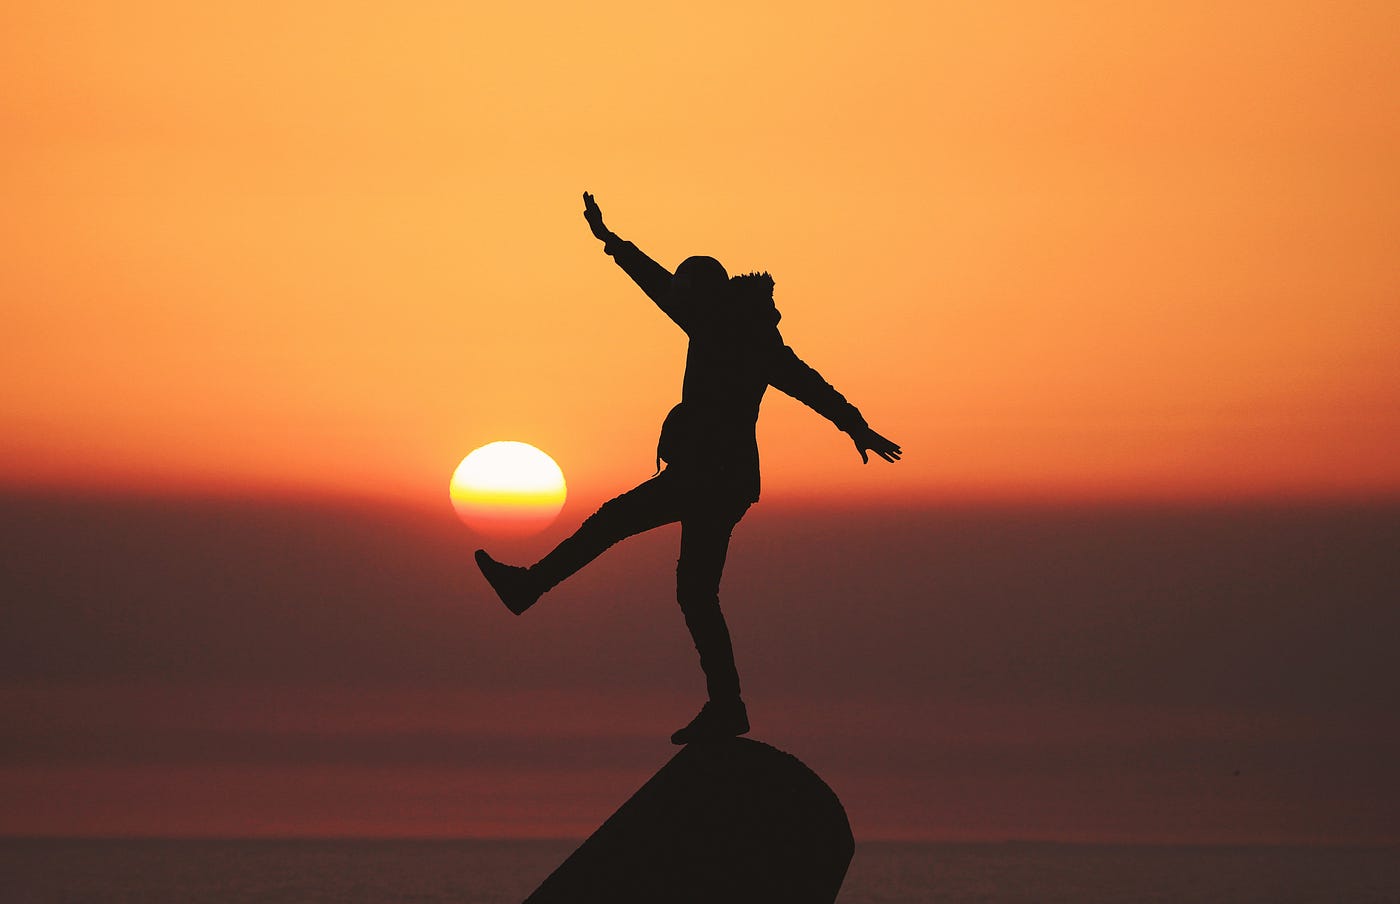 A person balances on a rock as the sun sets in the distance. Balance involves a complex interplay of sensory information from your eyes, ears, and muscles. This teamwork ensures you can adjust your position and distribute your weight accordingly, preventing those unexpected tumbles.